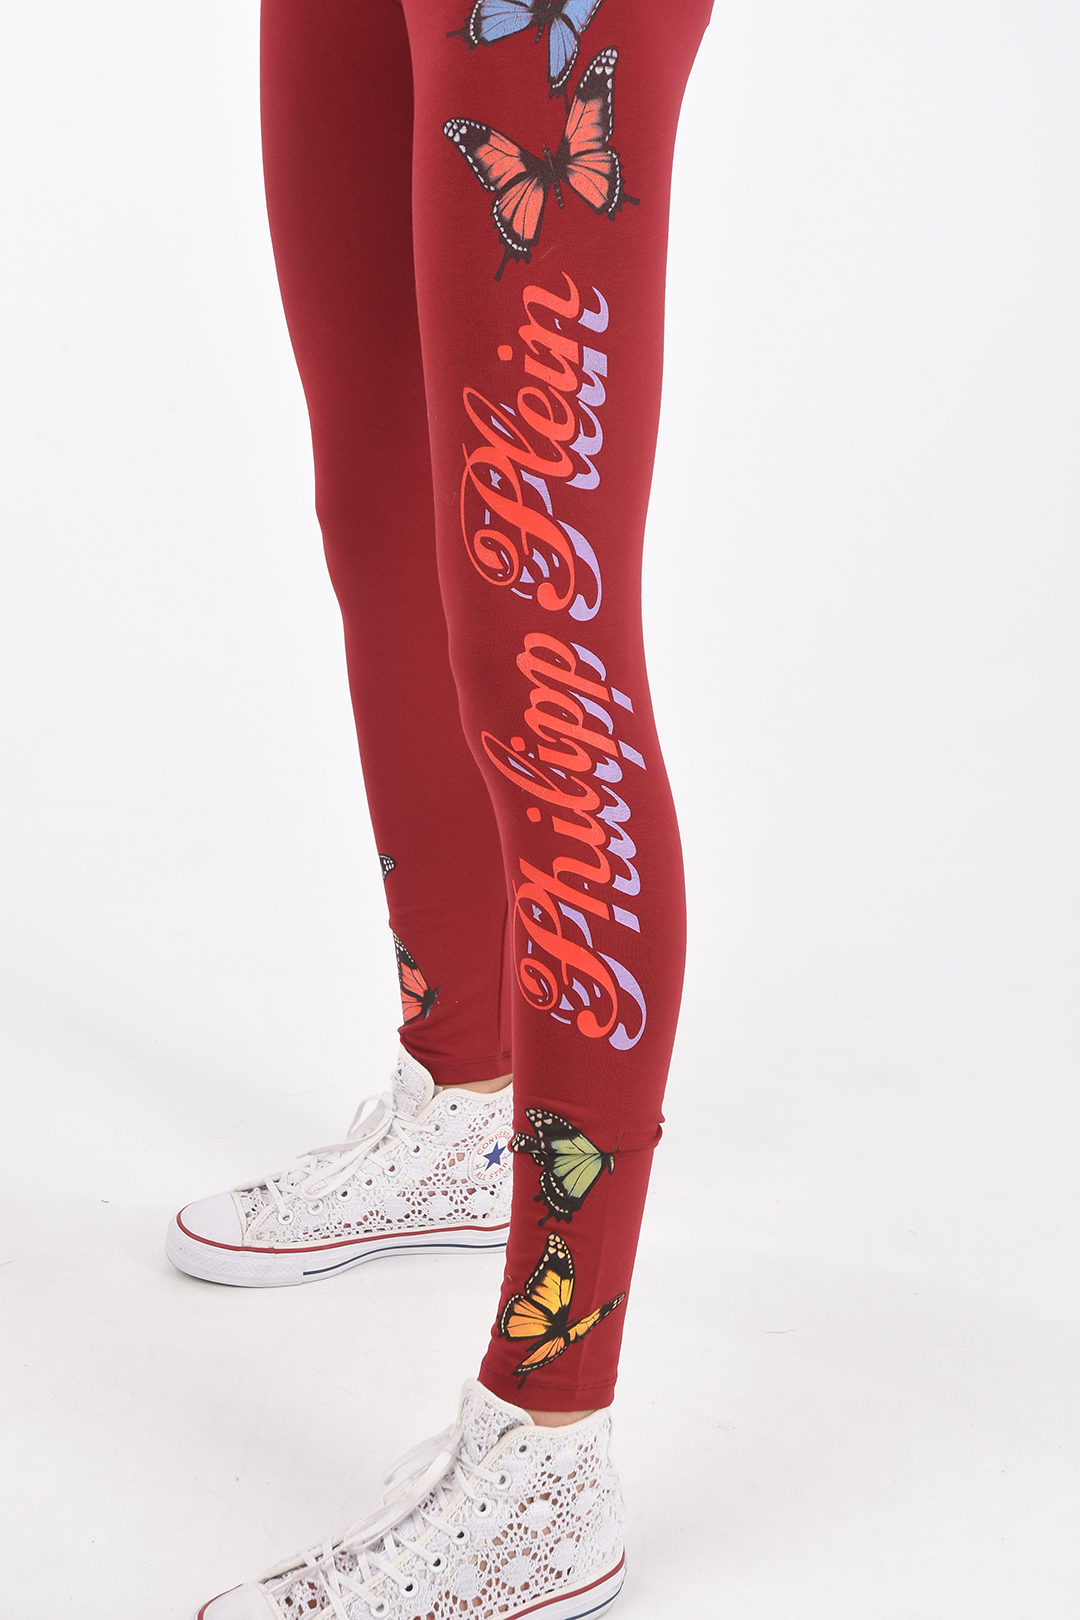 https://data.glamood.com/imgprodotto/couture-butterfly-printed-jogging-leggings_1113119_zoom.jpg